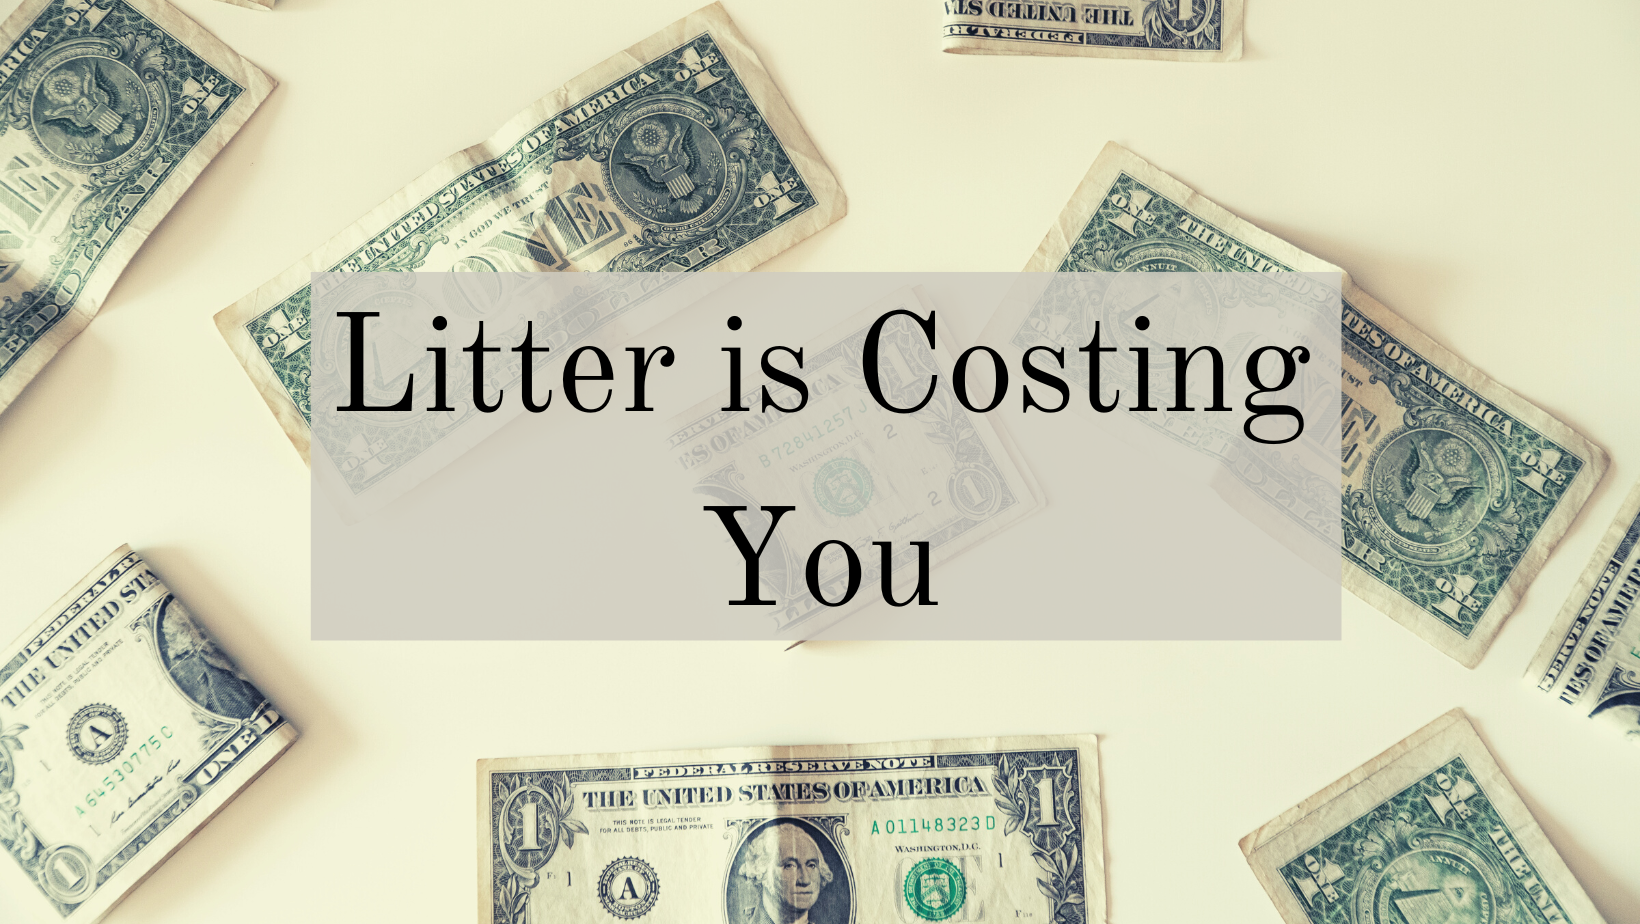 Litter is Costing You